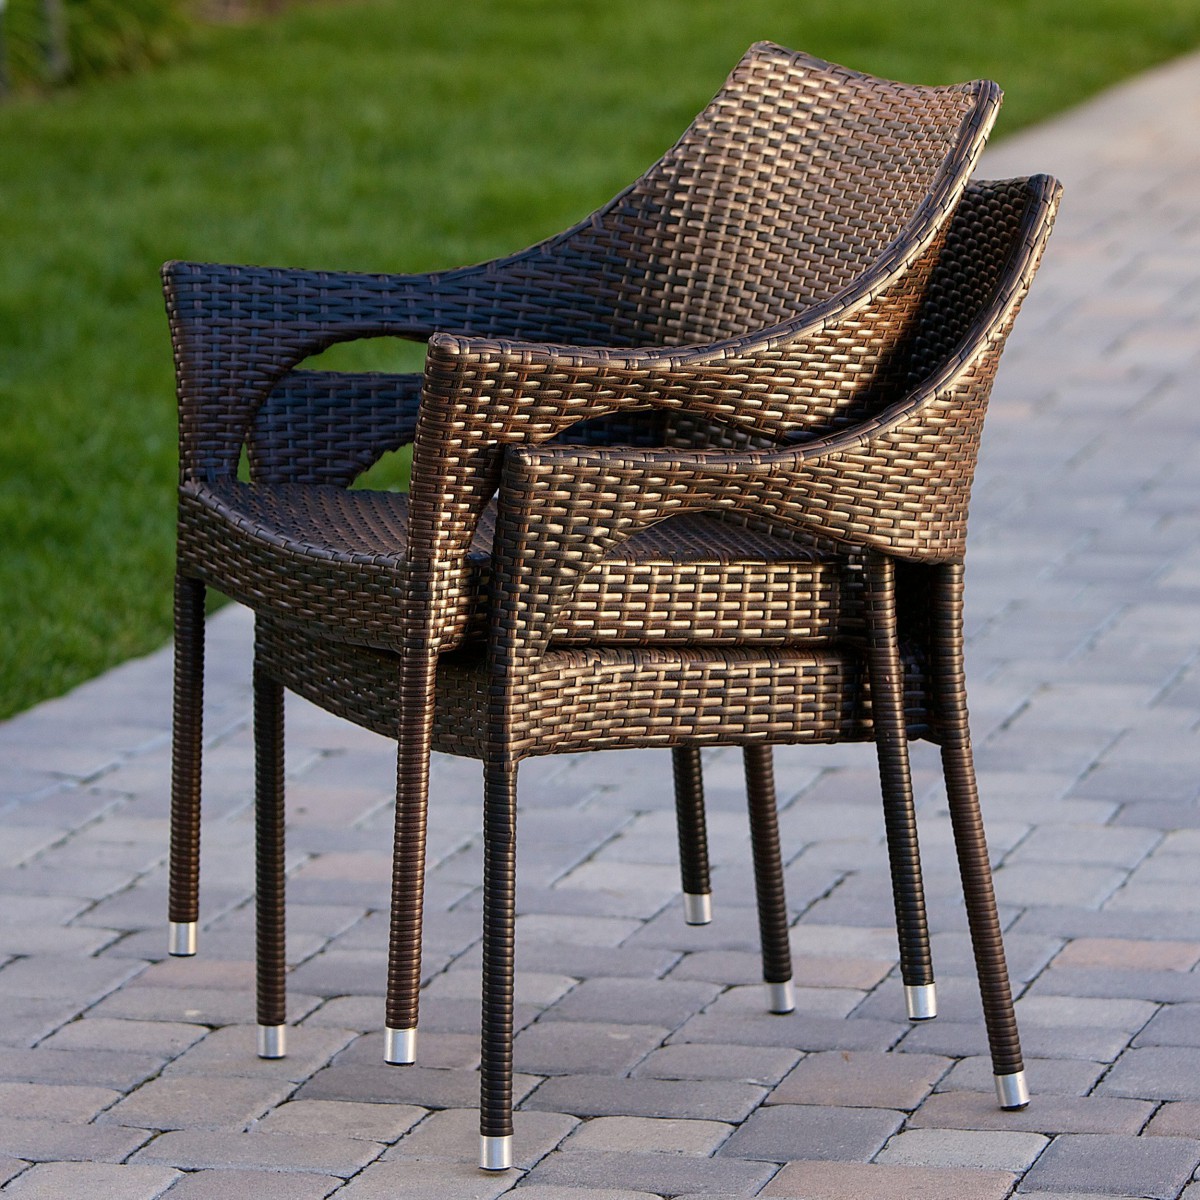 Del Mar Wicker 5 Piece Outdoor Dining Set with Stackable Wicker Chairs